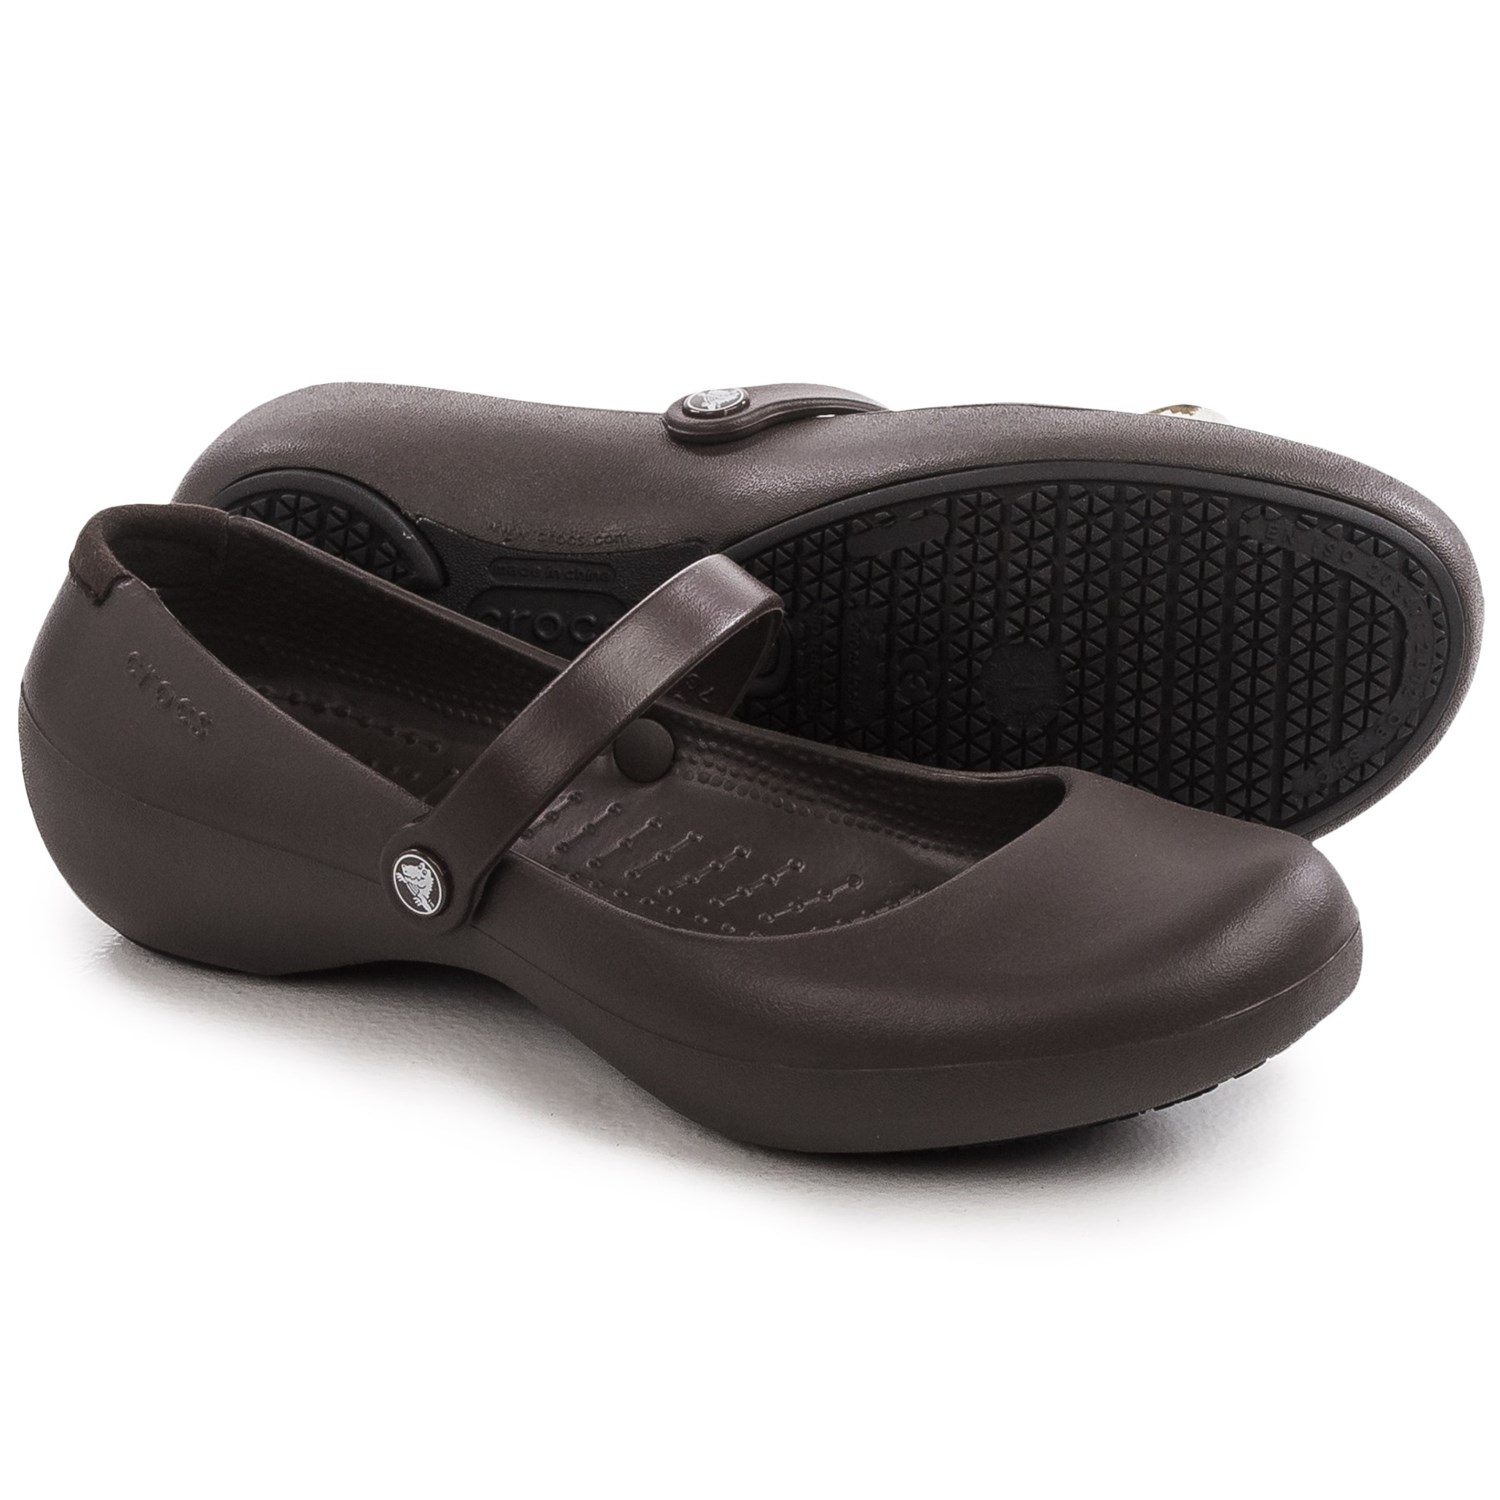 Crocs Alice Work Shoes (For Women) - Save 50%